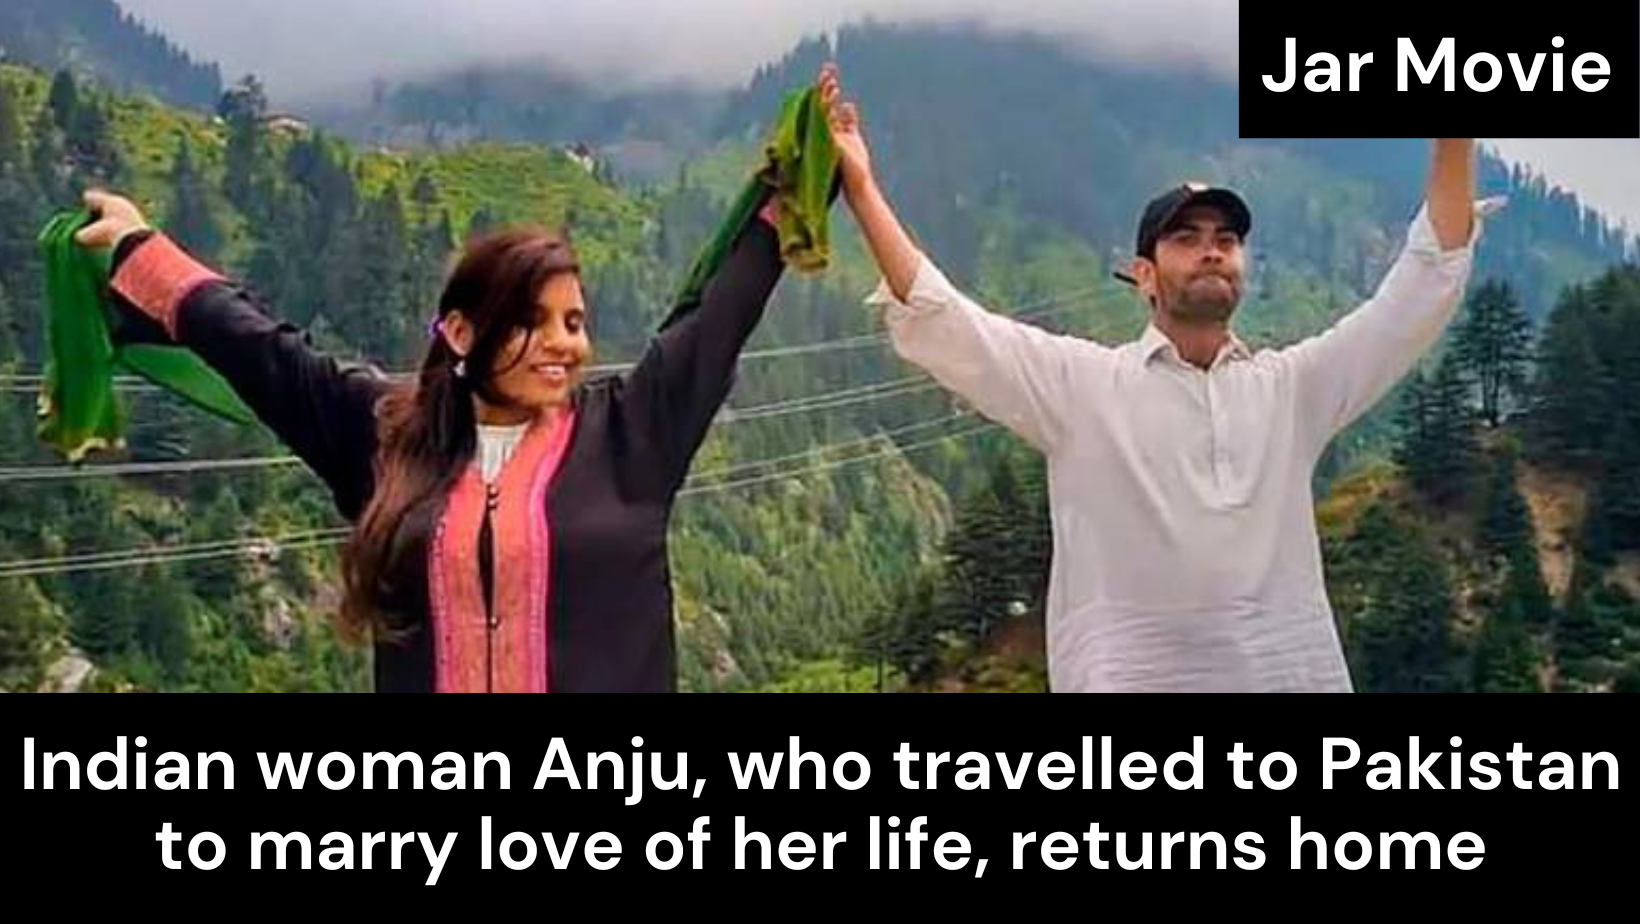 Anju, an Indian woman, comes home after traveling to Pakistan to wed her true love.